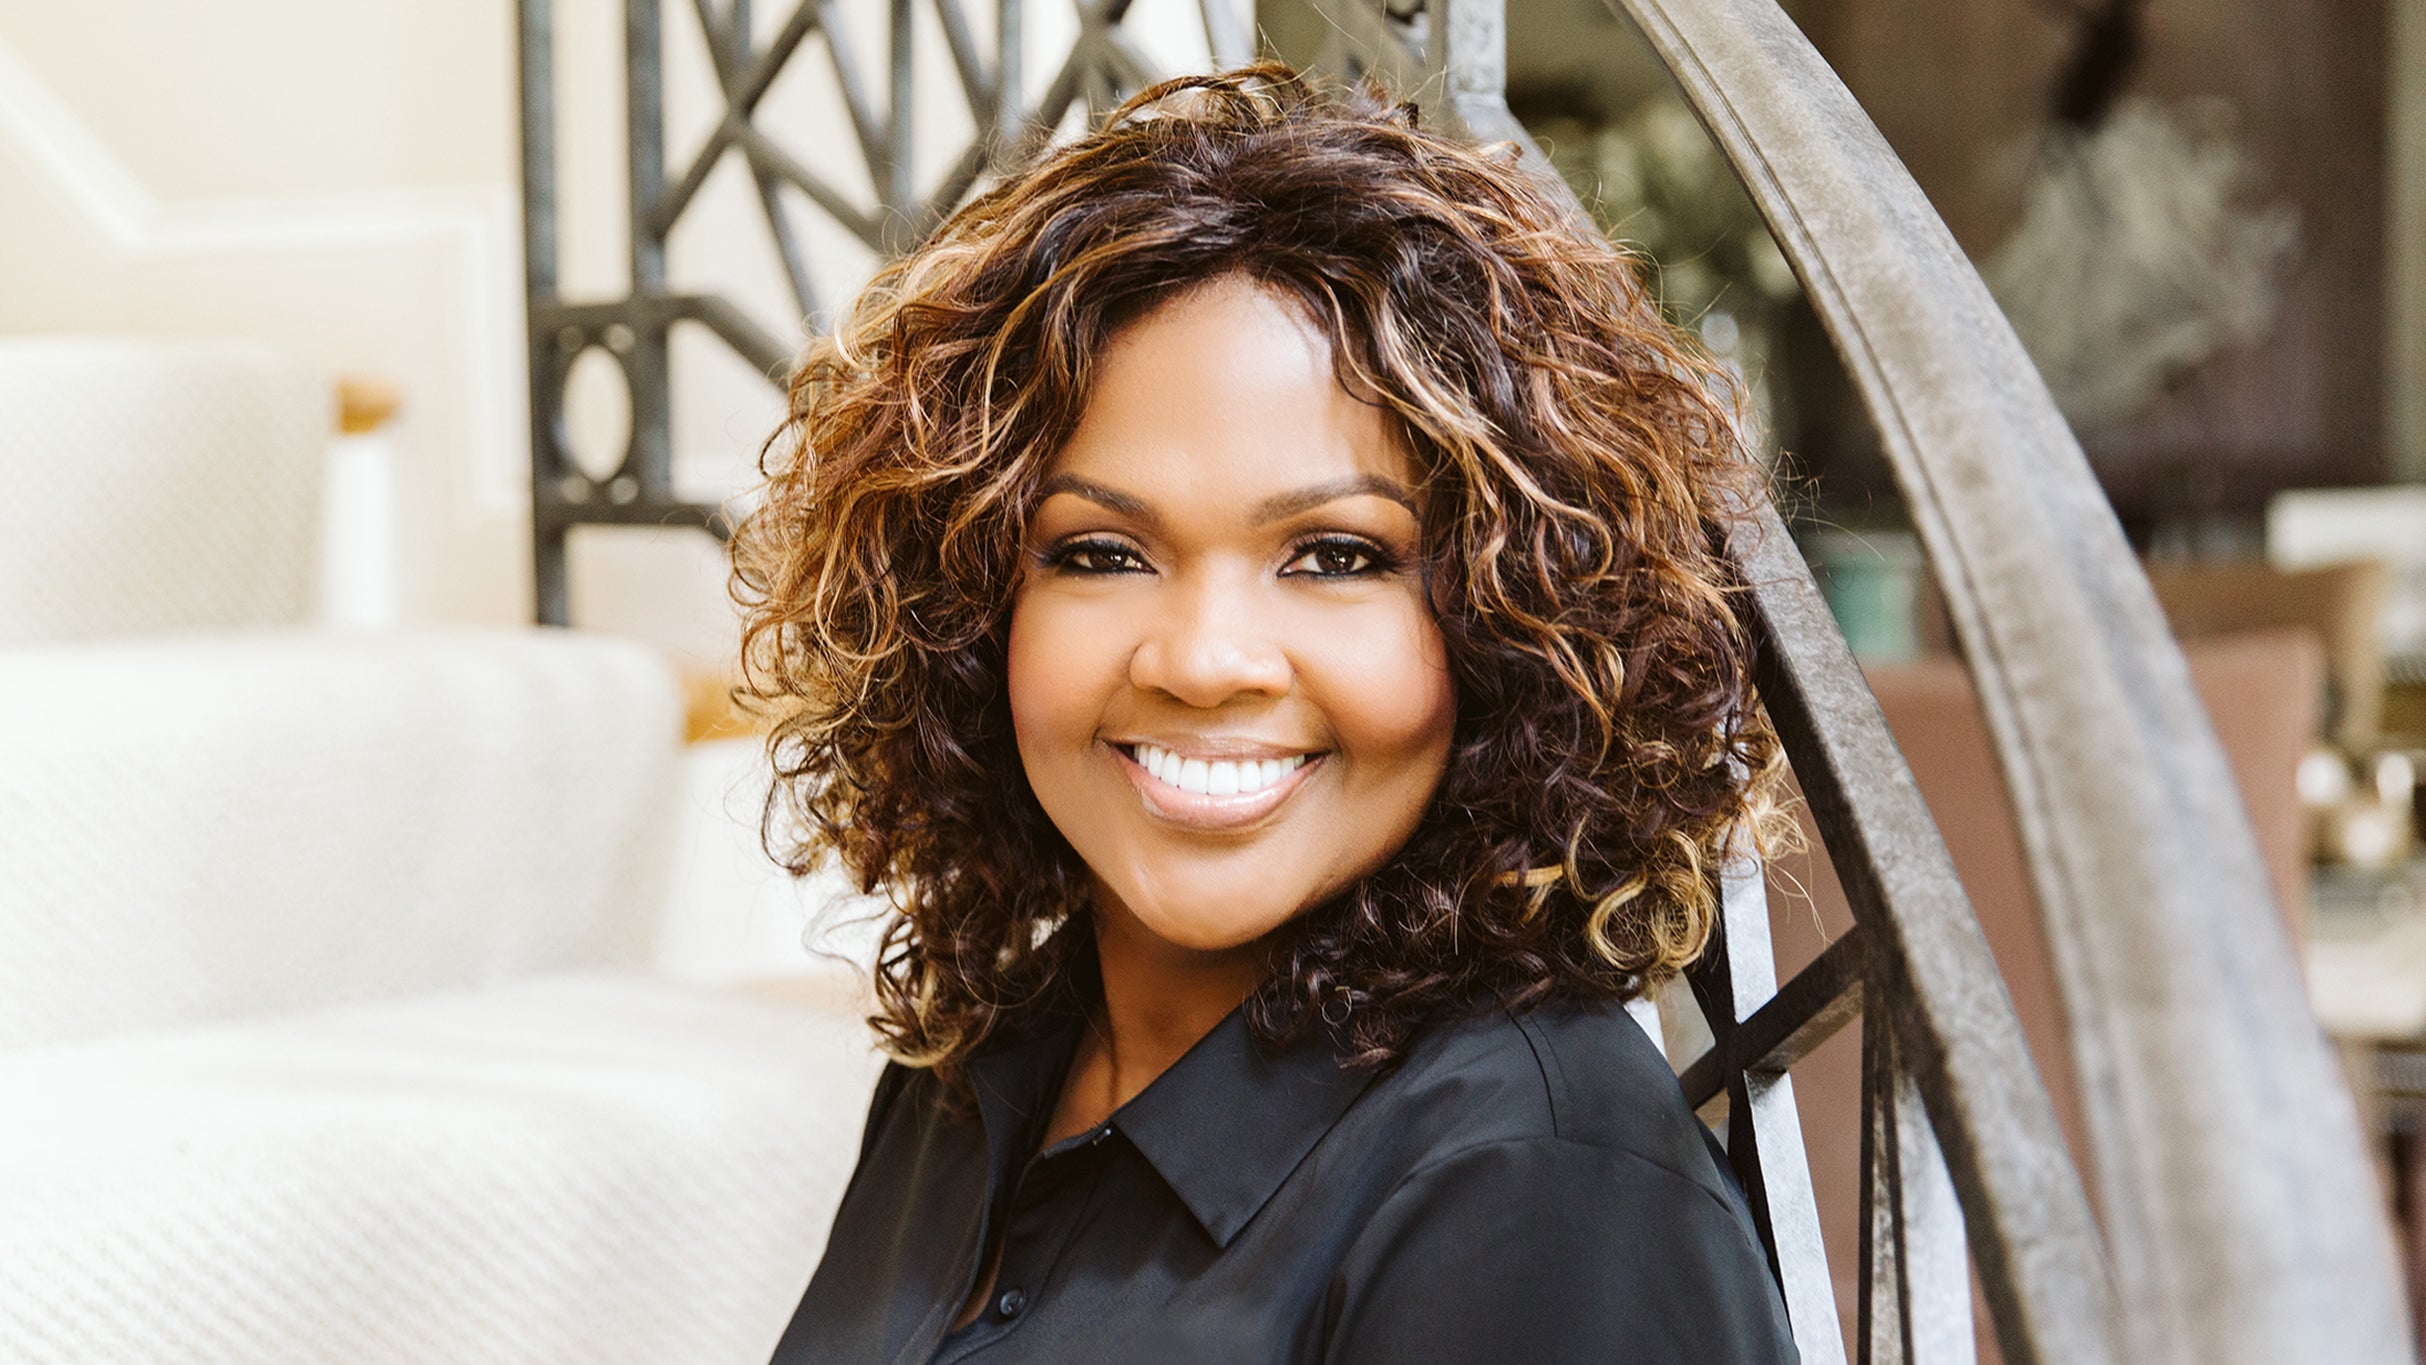 Cece Winans at Blue Gate Performing Arts Center